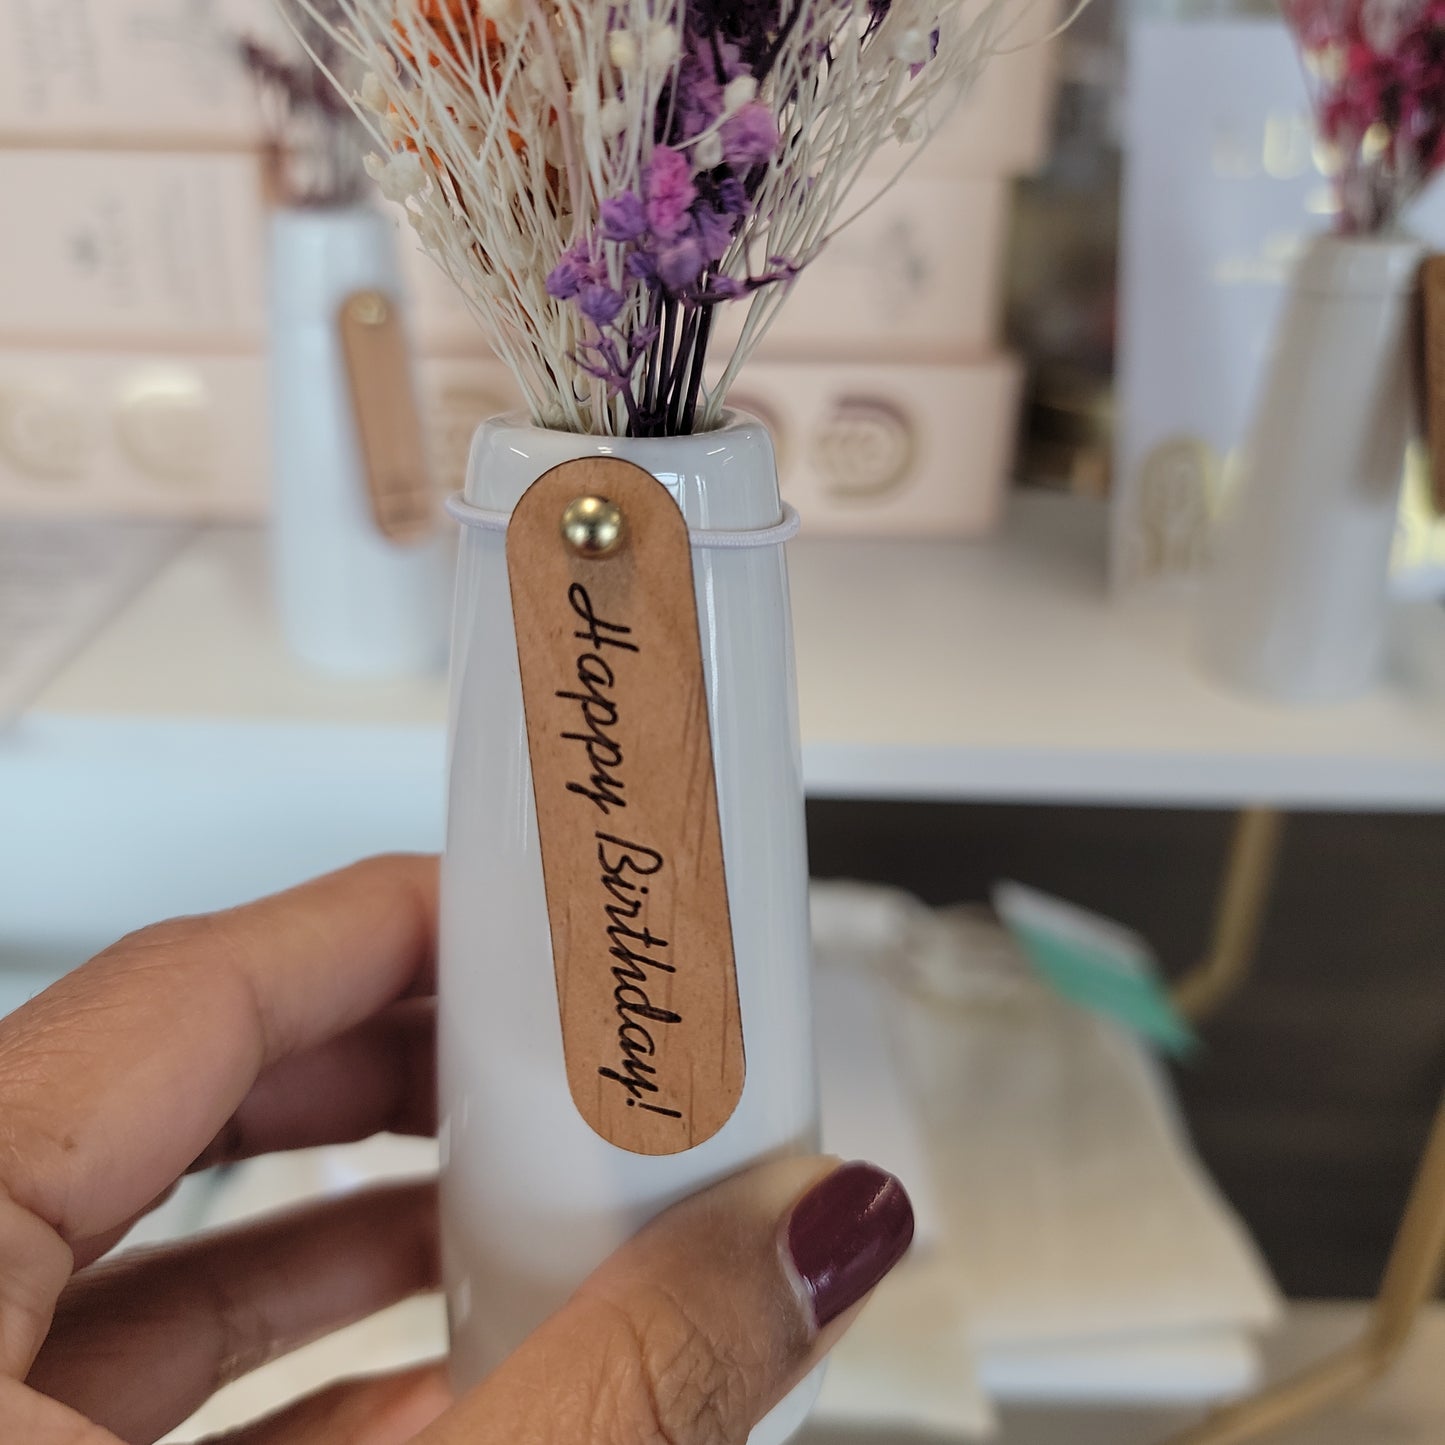 Mini Dried Floral Vases & Wood Gift Tag